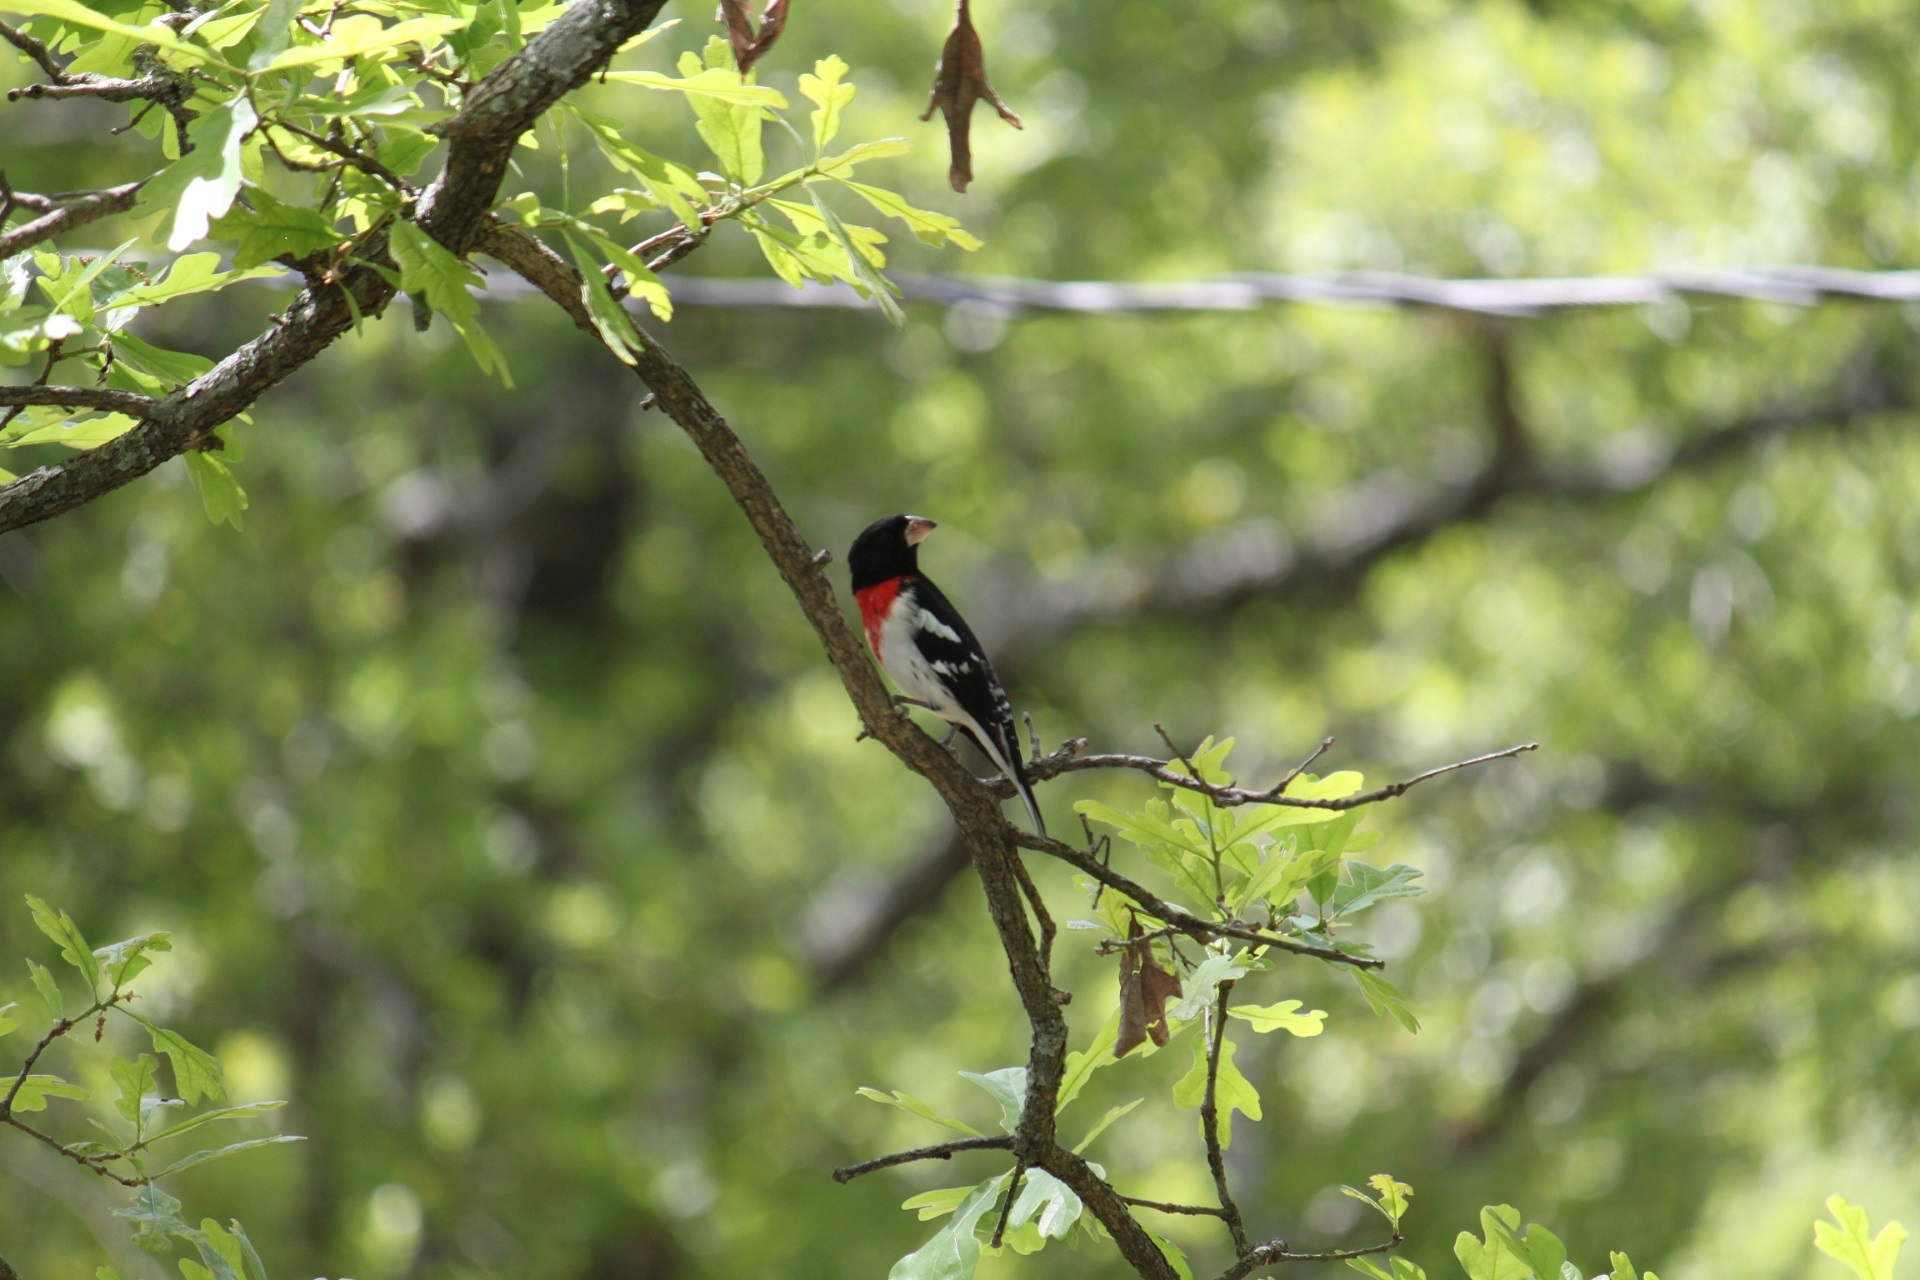 Rose-breasted Grosbeak (pheucticus ludovicianus) by 3brb55